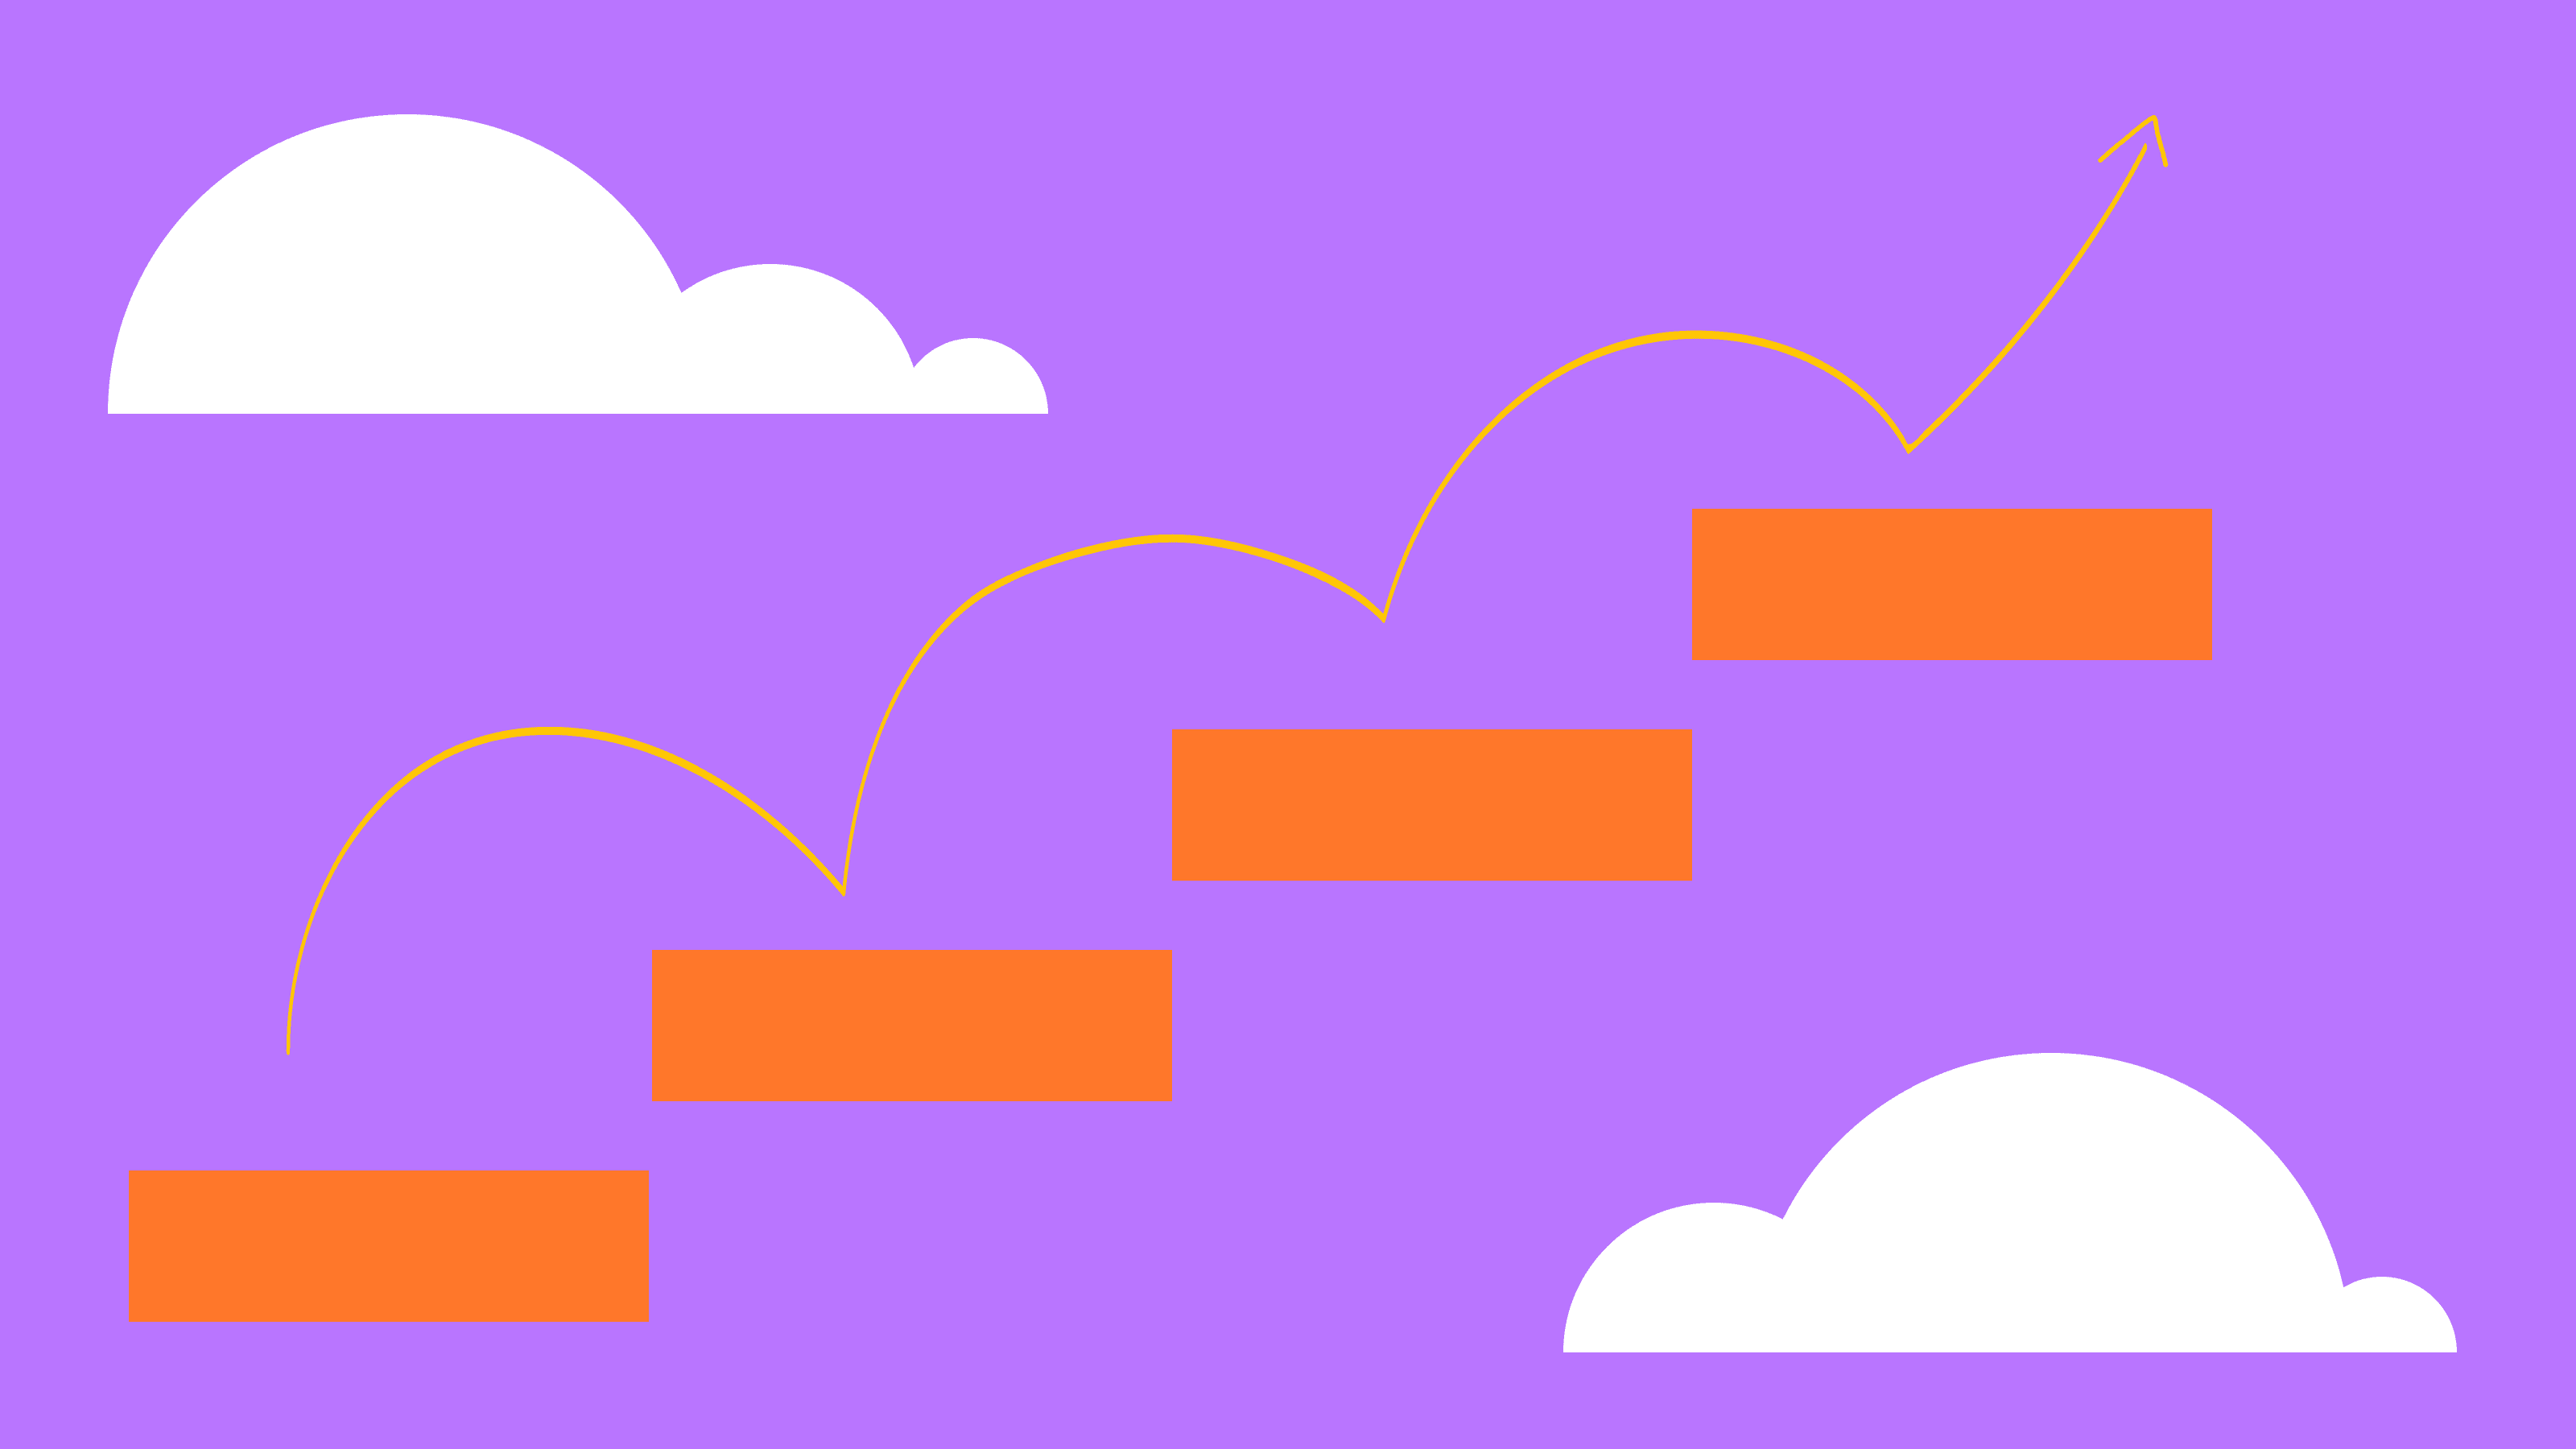 Illustration of a floating stairway surrounded by clouds, with an upwards arrow bouncing along each step.